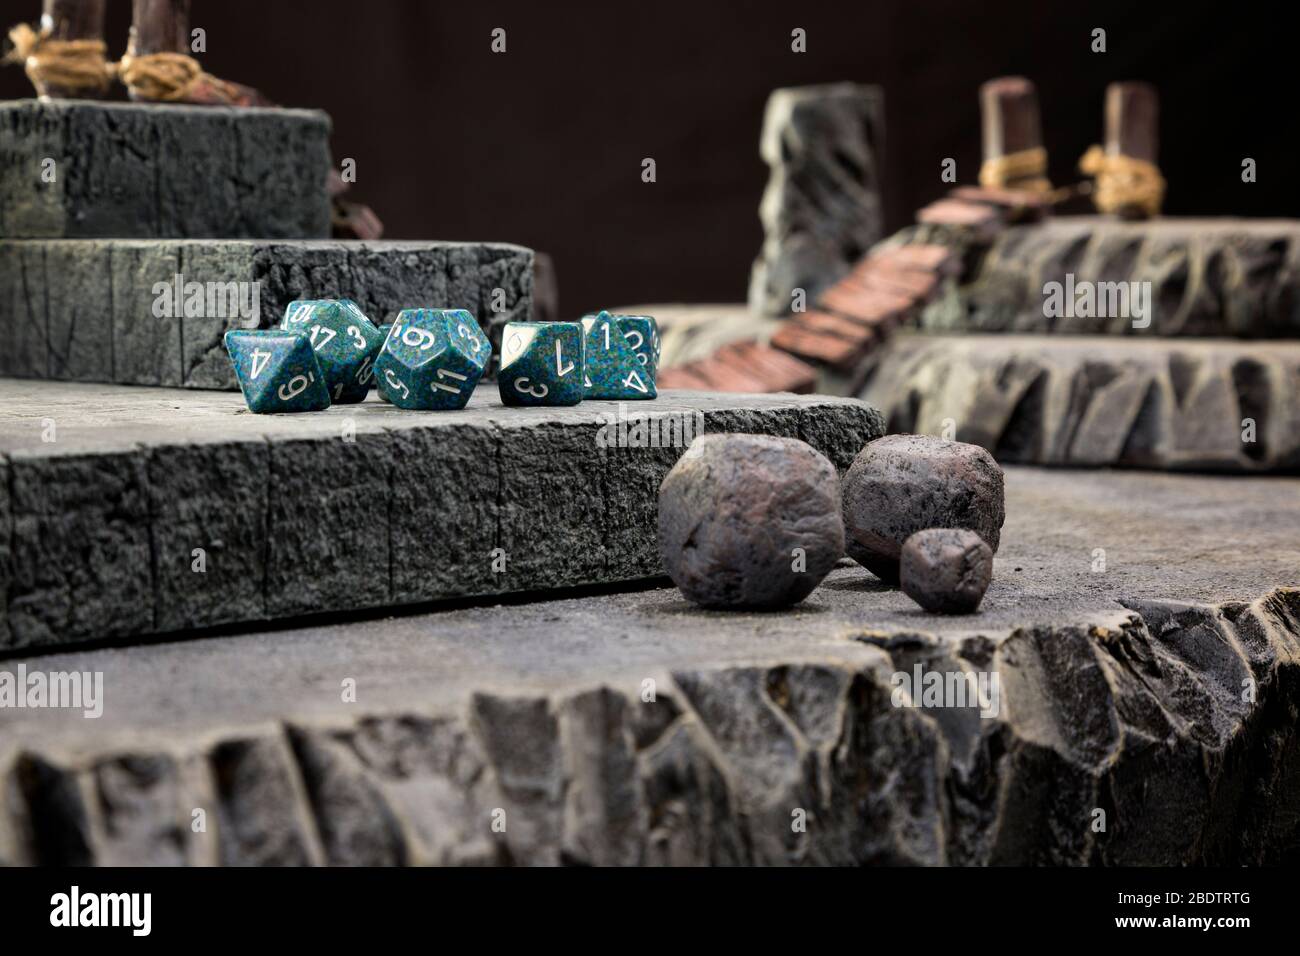 A close up of a gaming set up for a Dungeons and Dragons type role playing game. Stock Photo